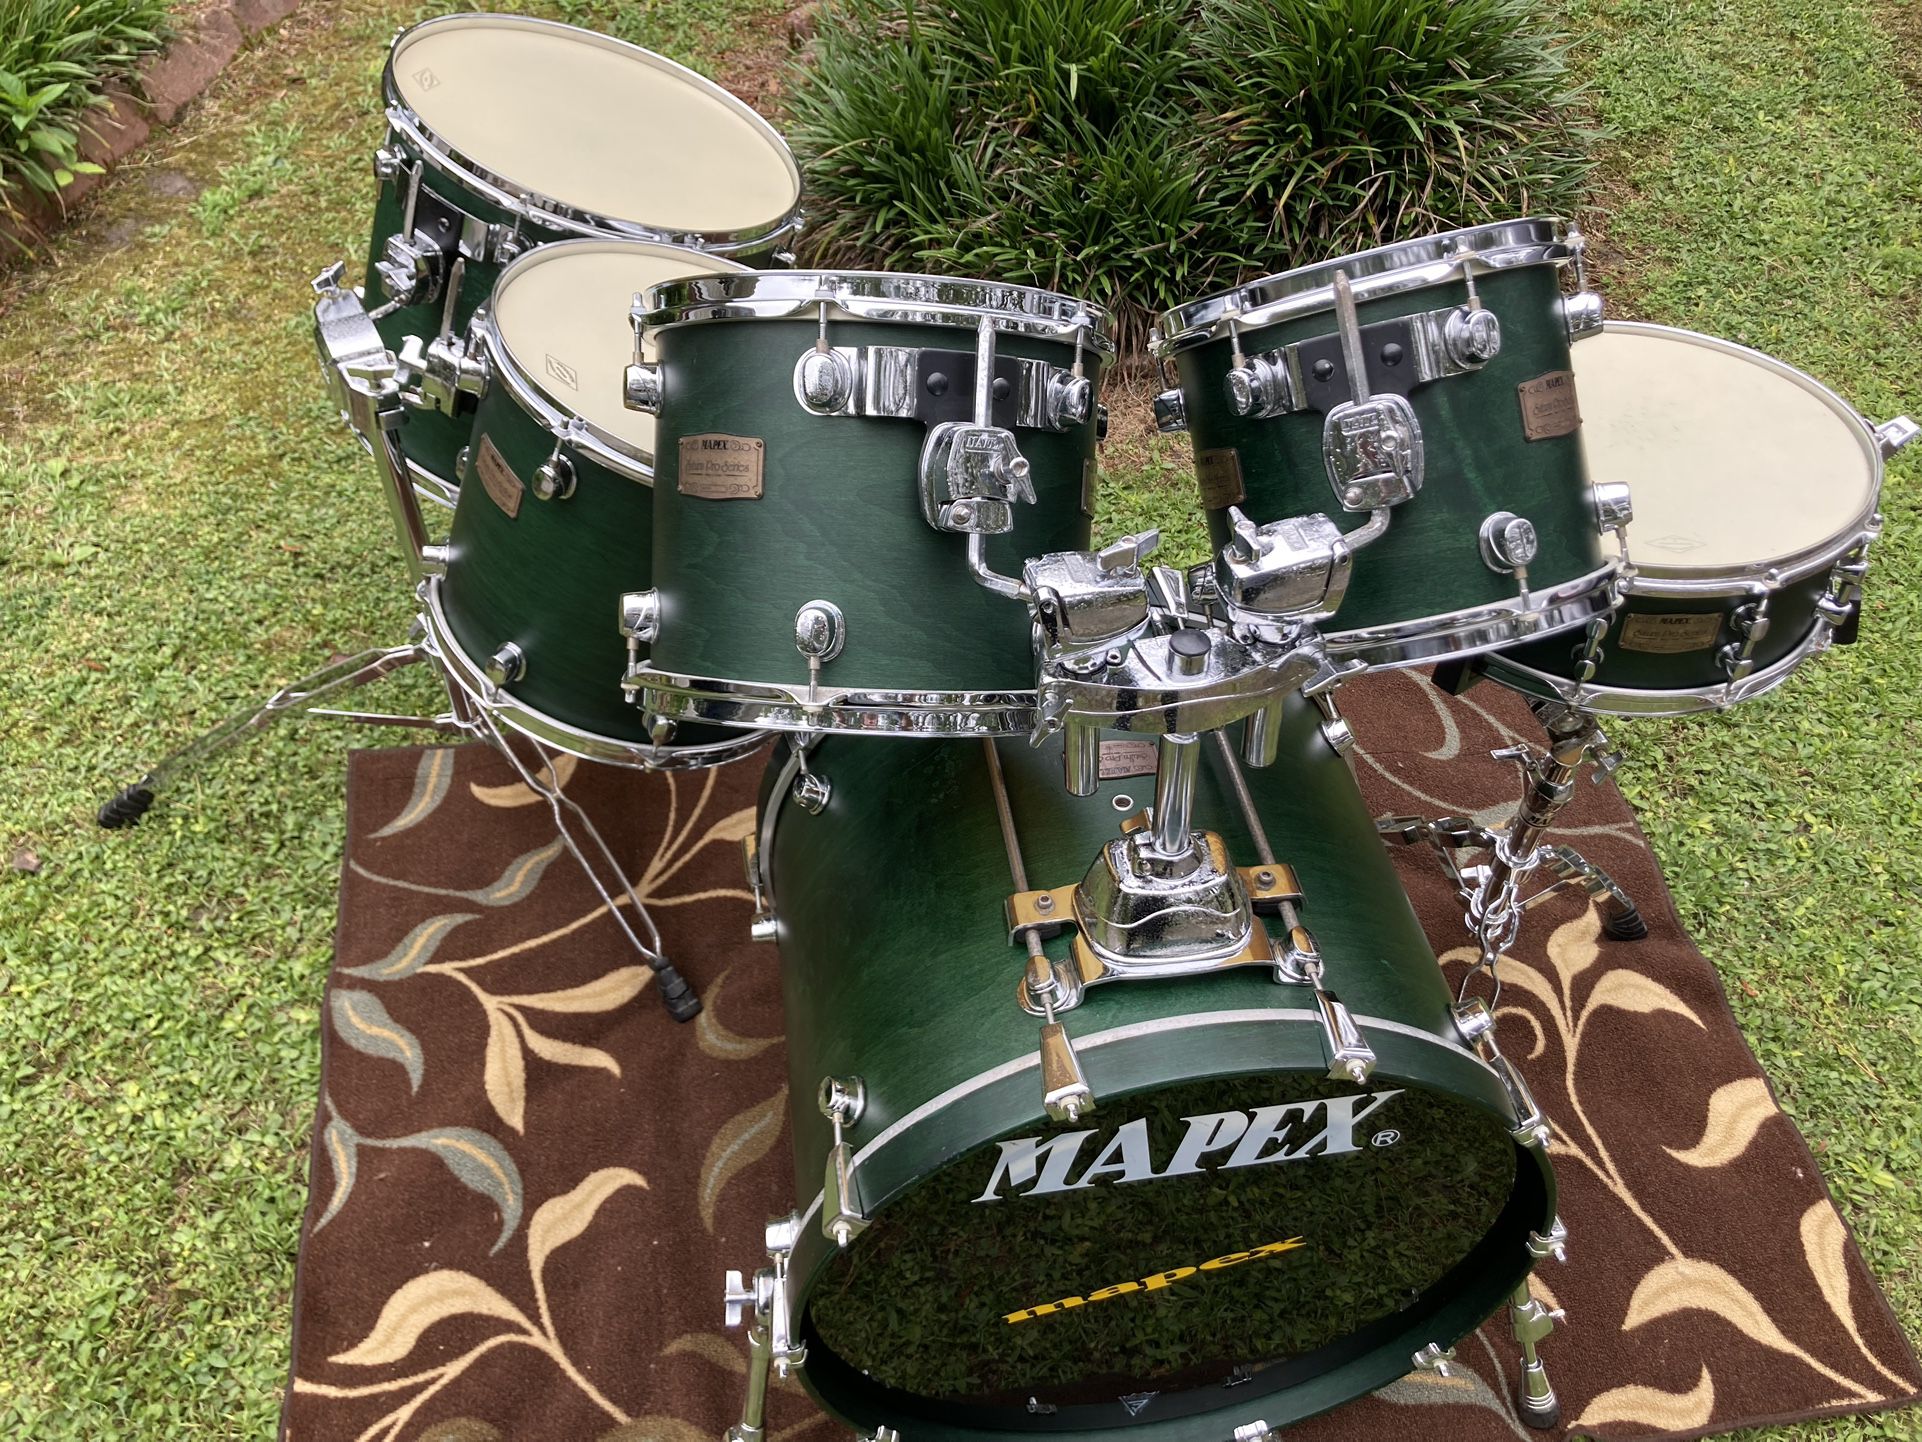 1994 Mapex Saturn Pro Series Drum Set. This is a beautiful emerald green top of the line kit with new Aquarian top heads